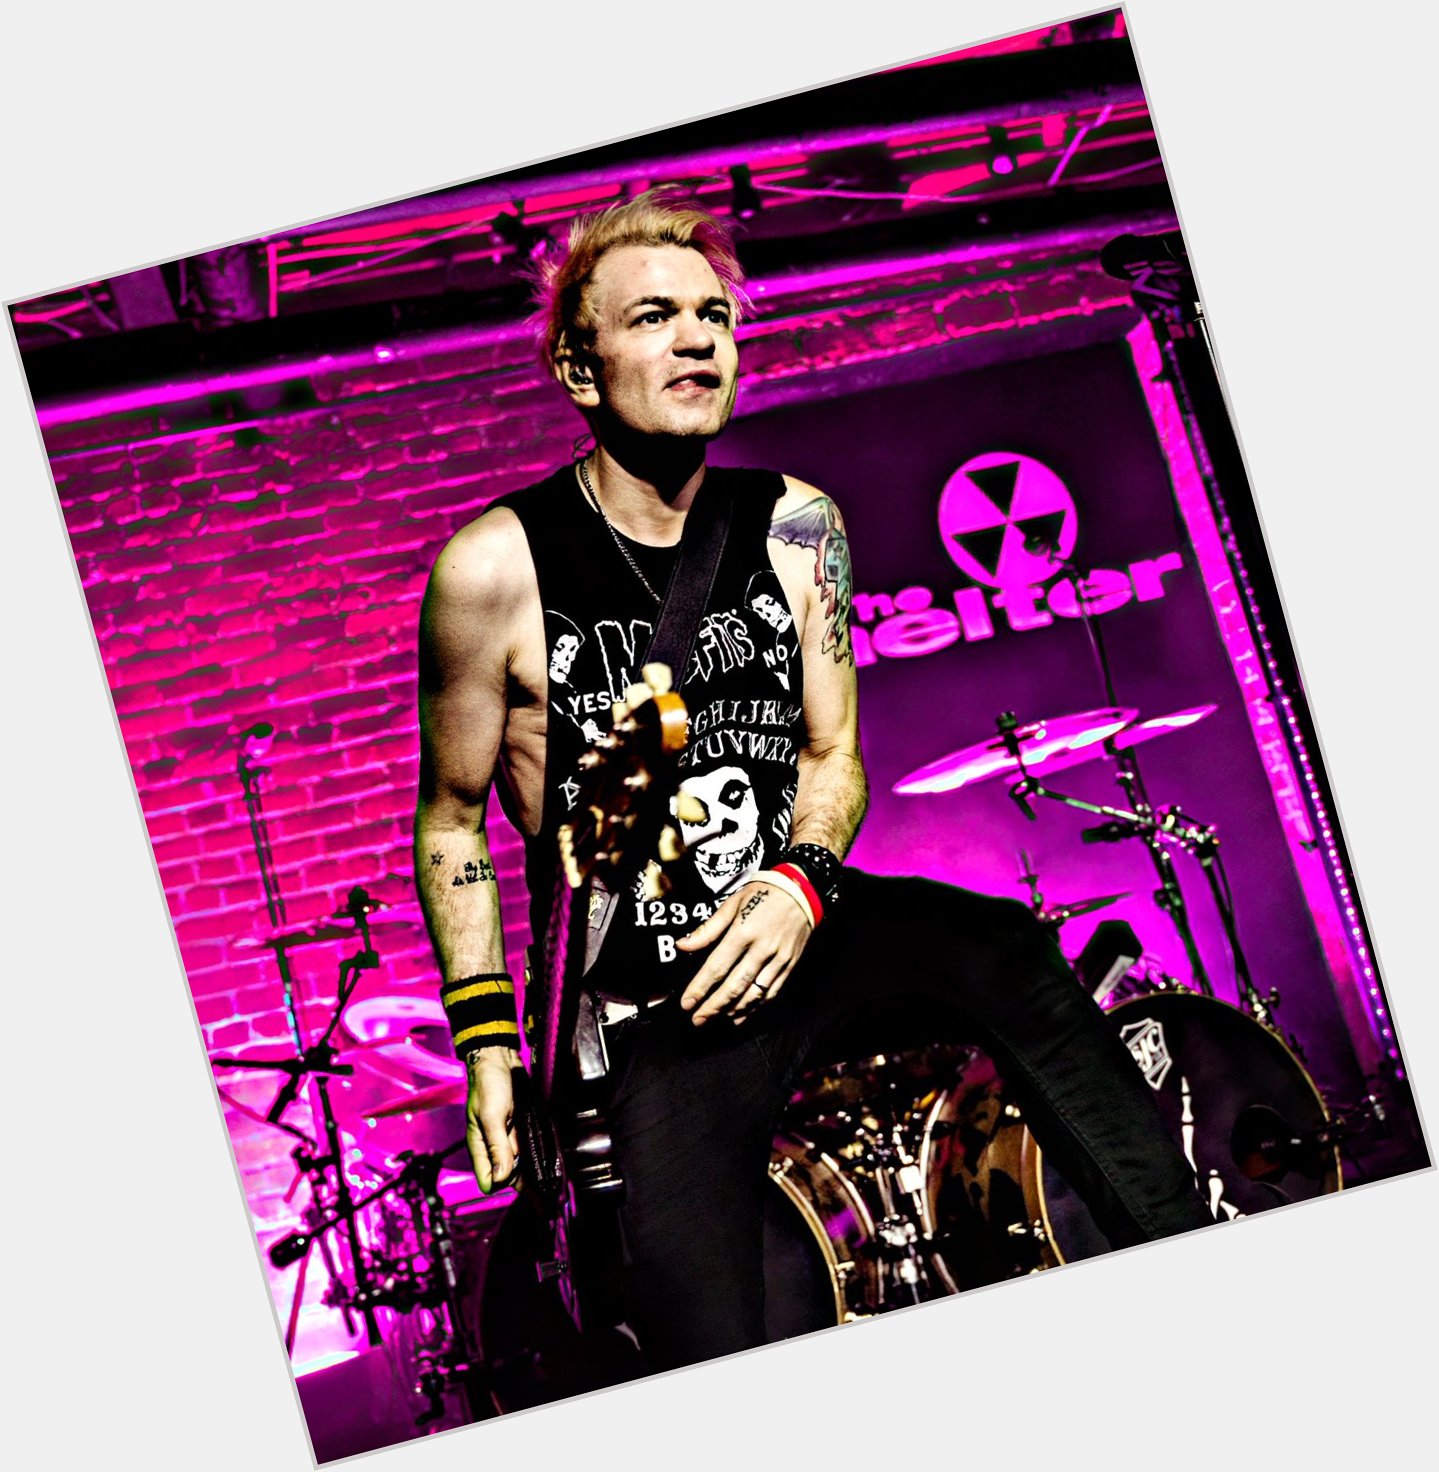 Happy Birthday to Deryck Whibley of 